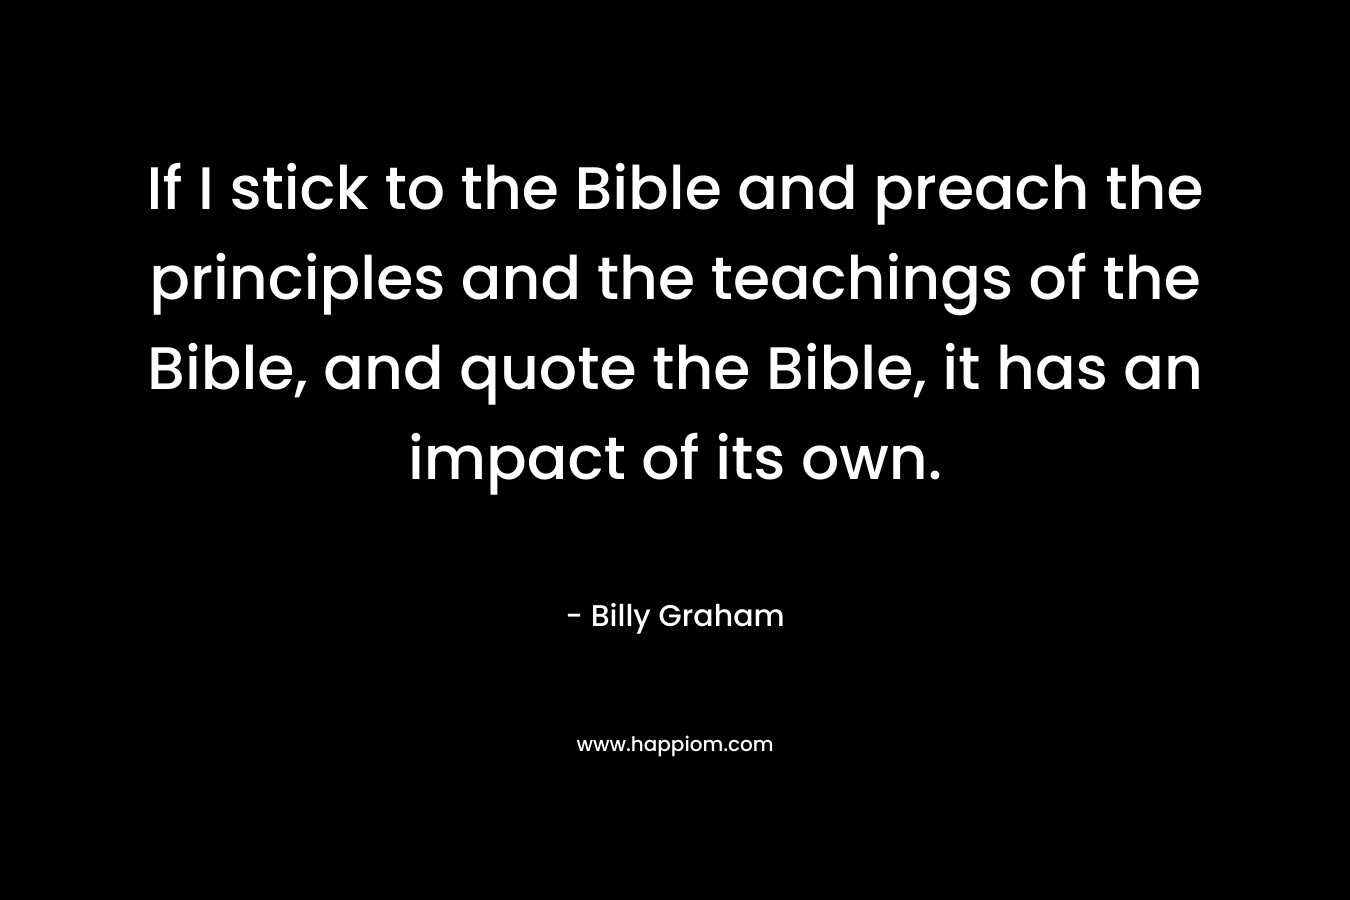 If I stick to the Bible and preach the principles and the teachings of the Bible, and quote the Bible, it has an impact of its own.